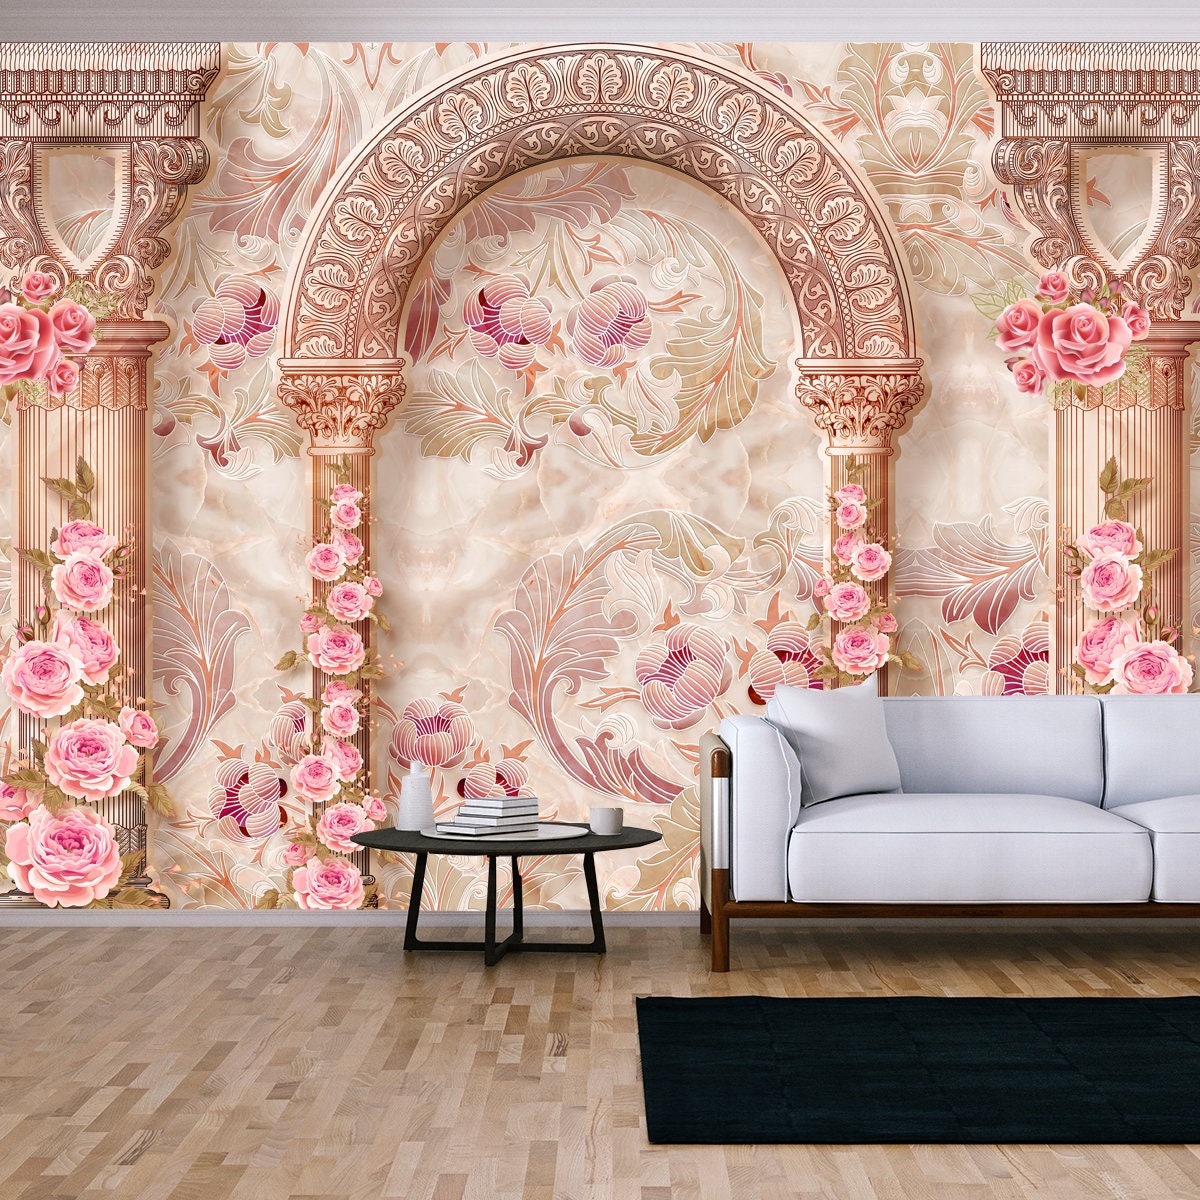 3d Wallpaper Marble Pattern Columns with Beautiful Pink Flowers Wallpaper Living Room Mural